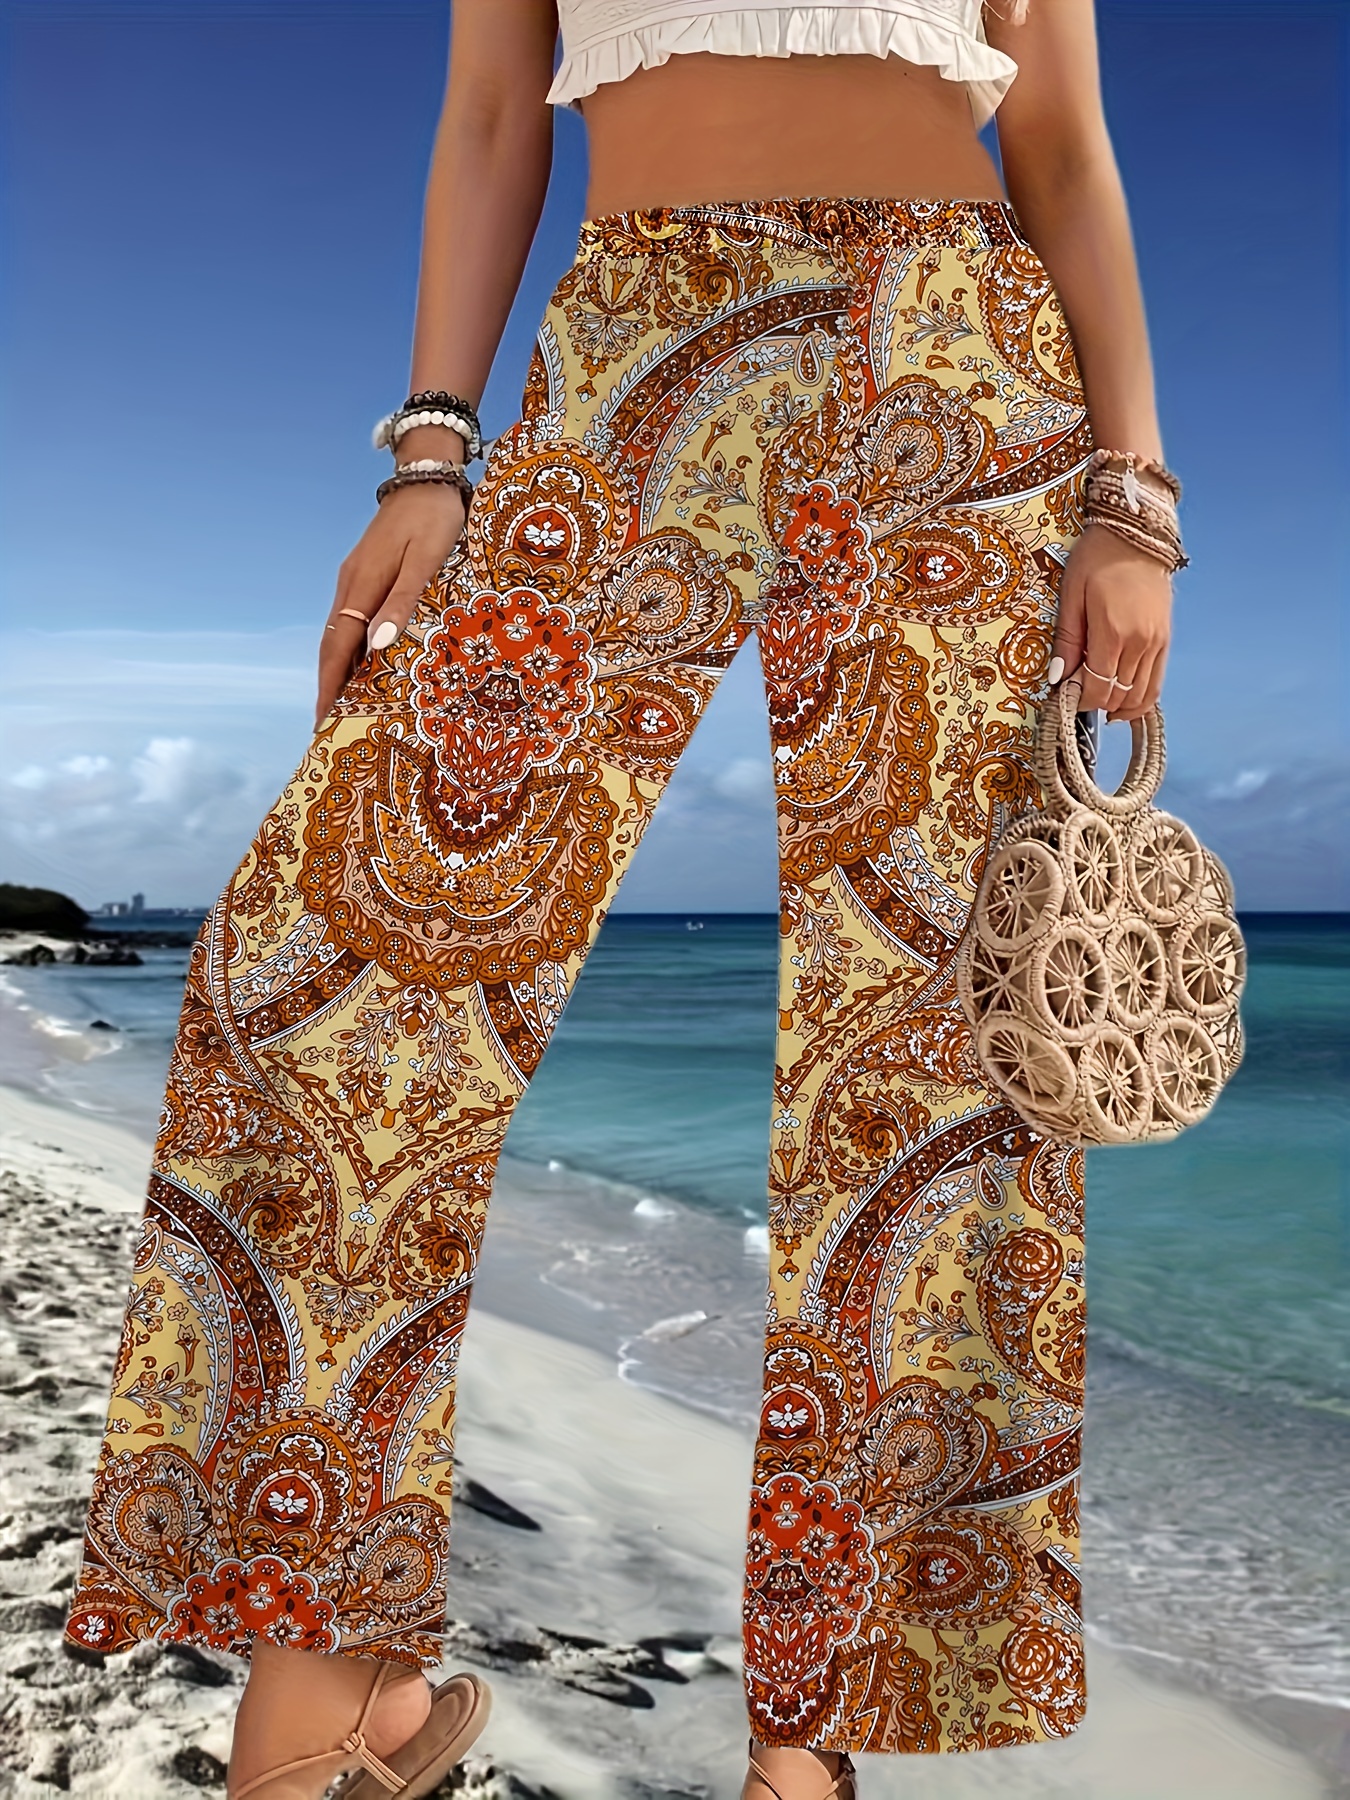 WOMENS LIGHTWEIGHT SUMMER PANTS WITH BLACK INDIAN PRINT